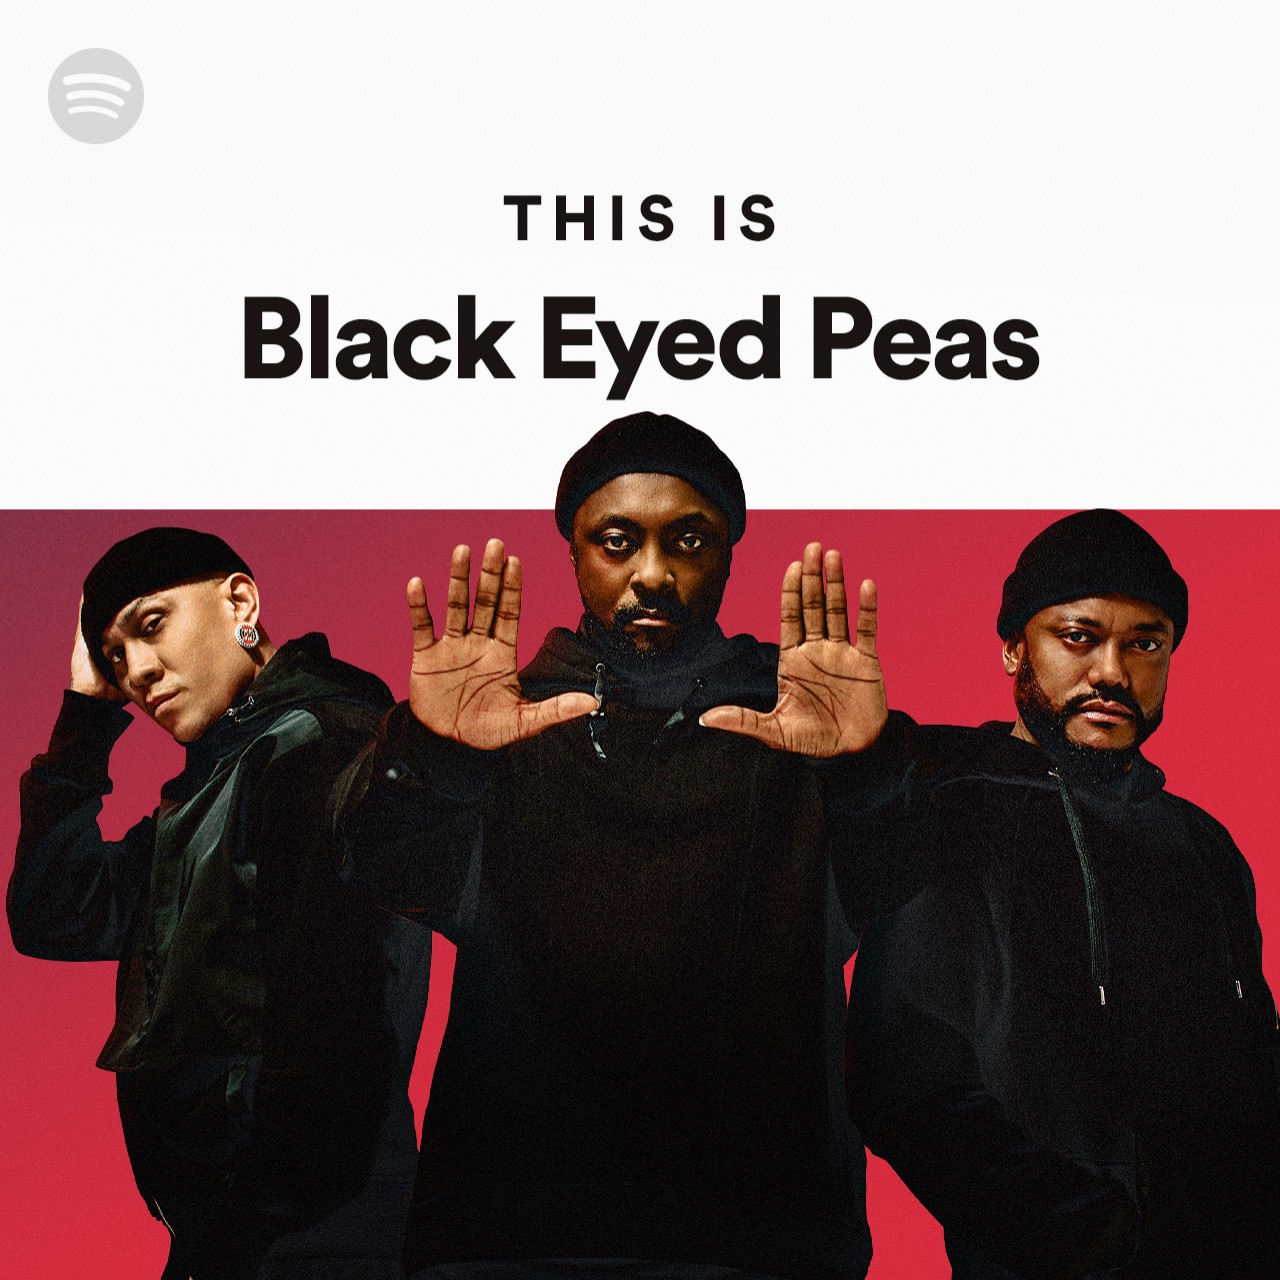 This Is Black Eyed Peas by spotify Spotify Playlist